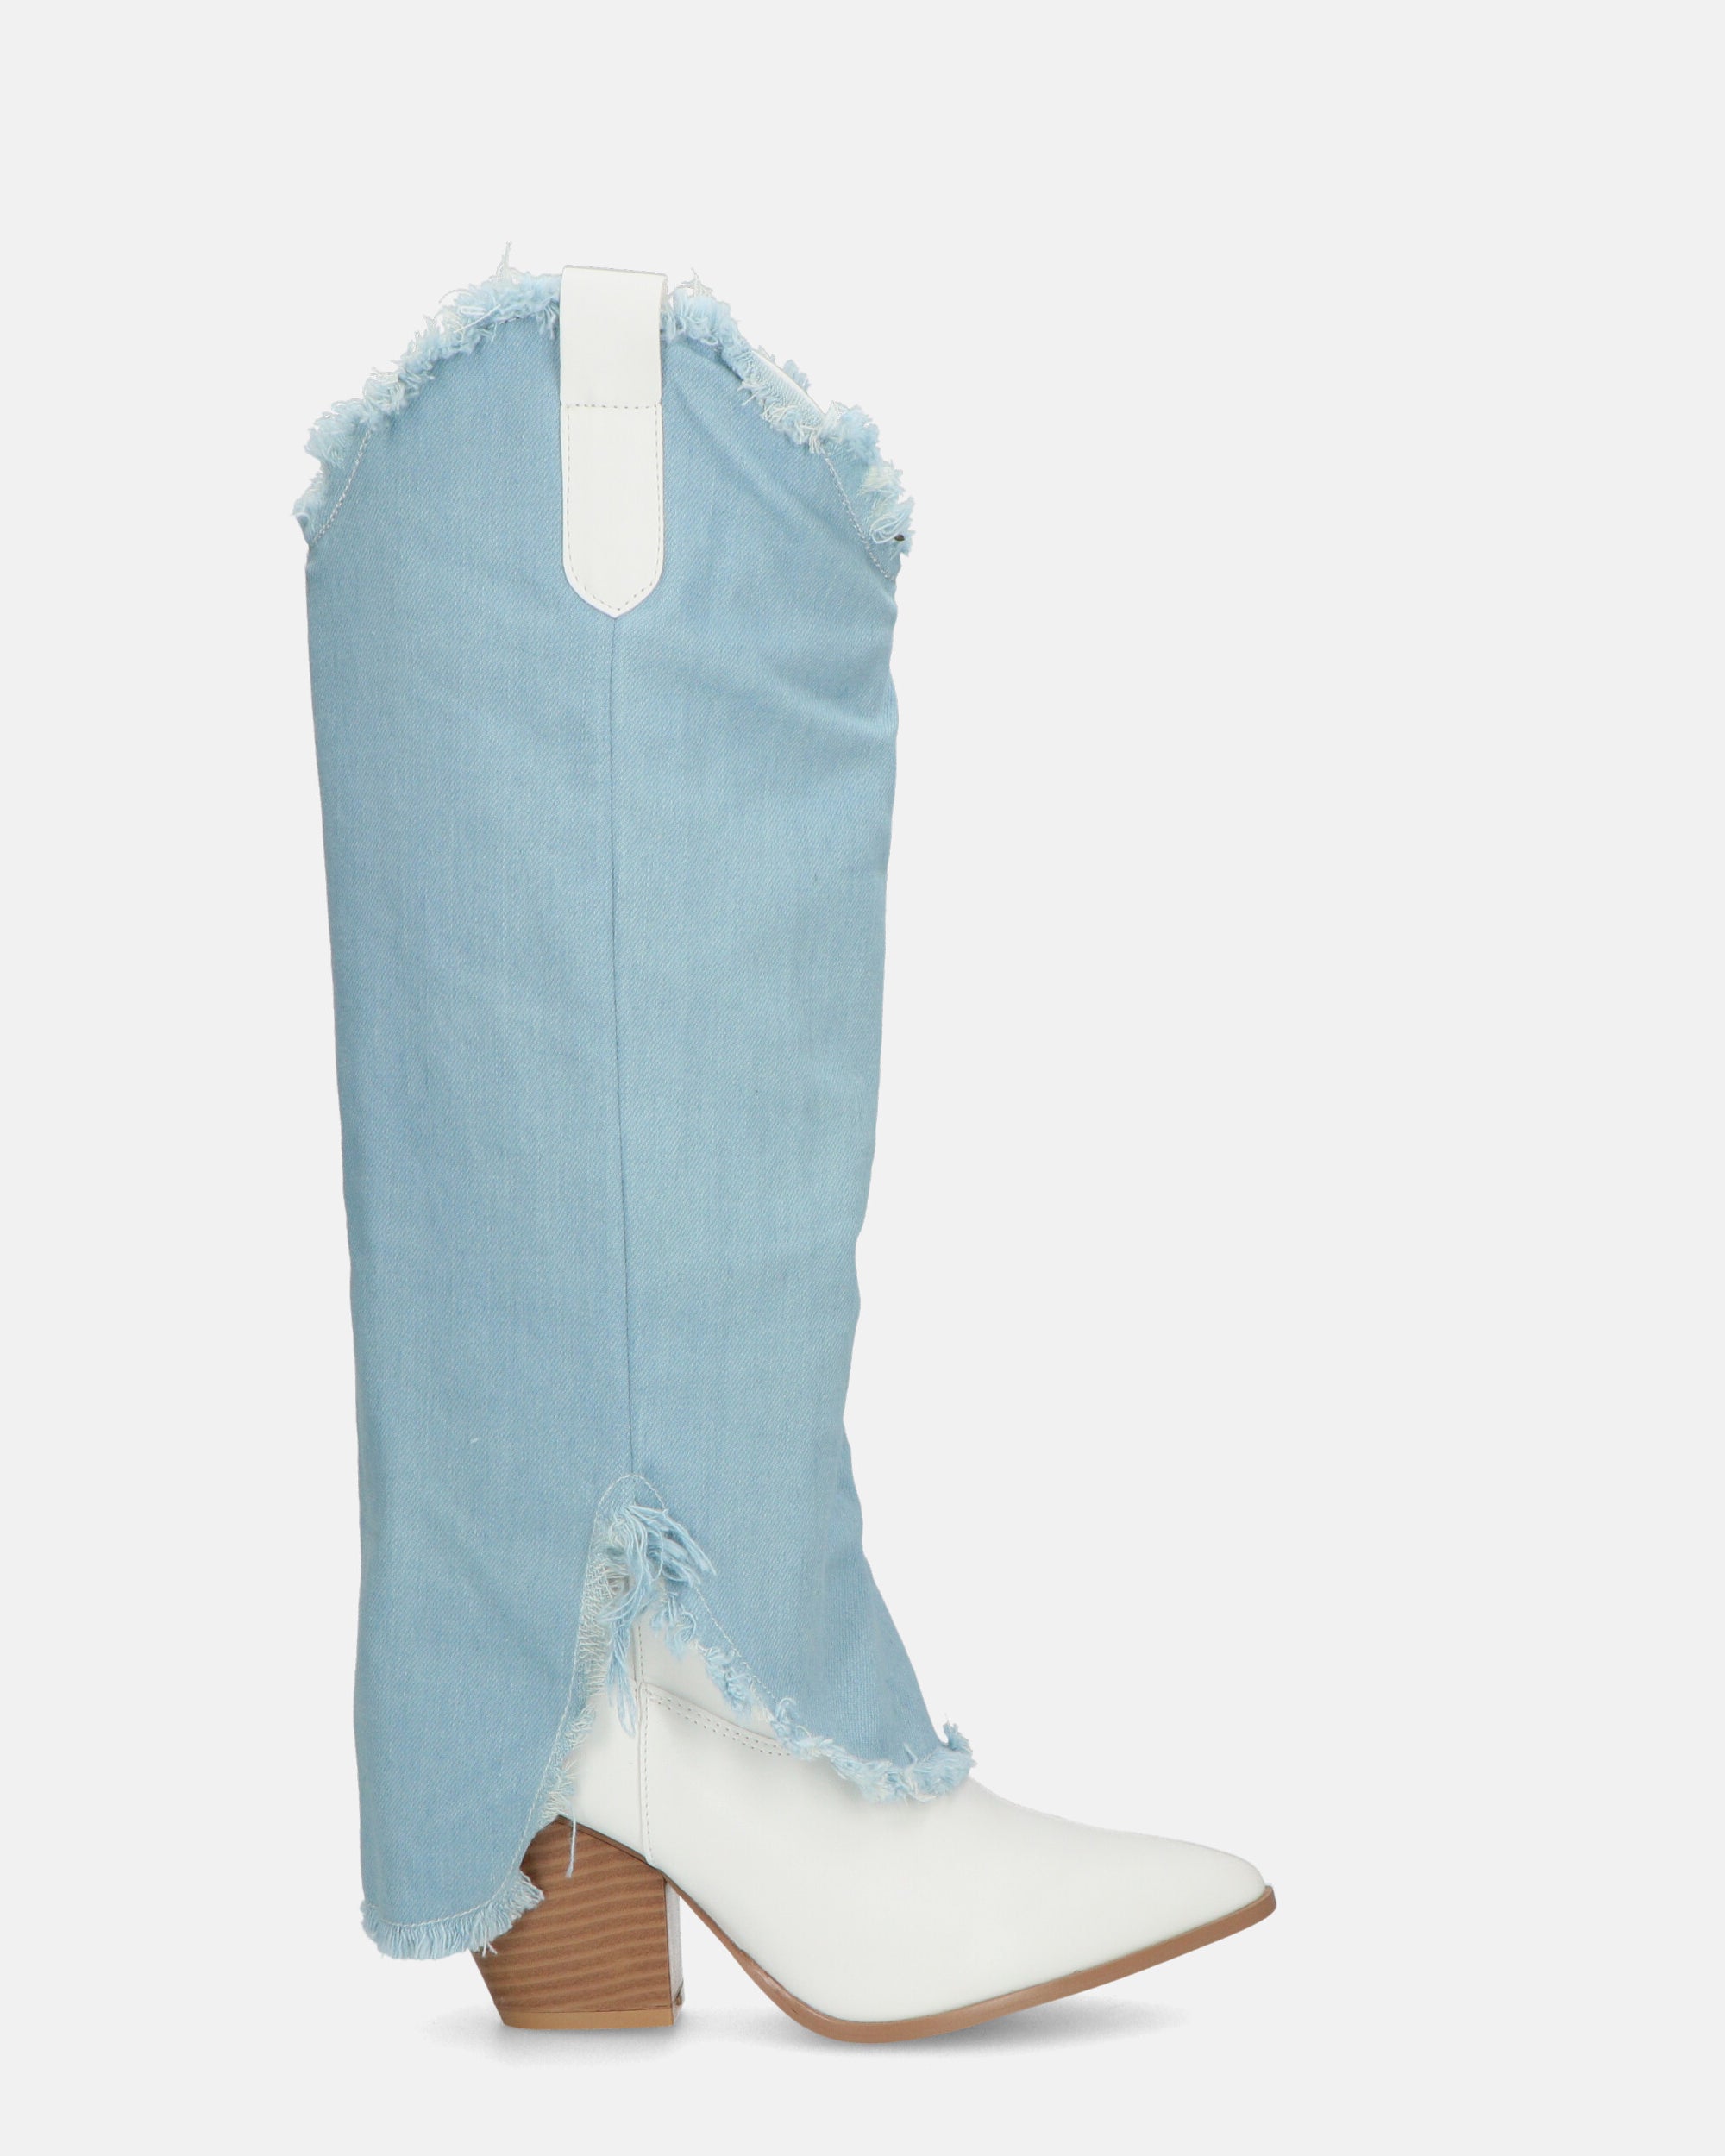 LEYRE - white PU boot with long denim cuff